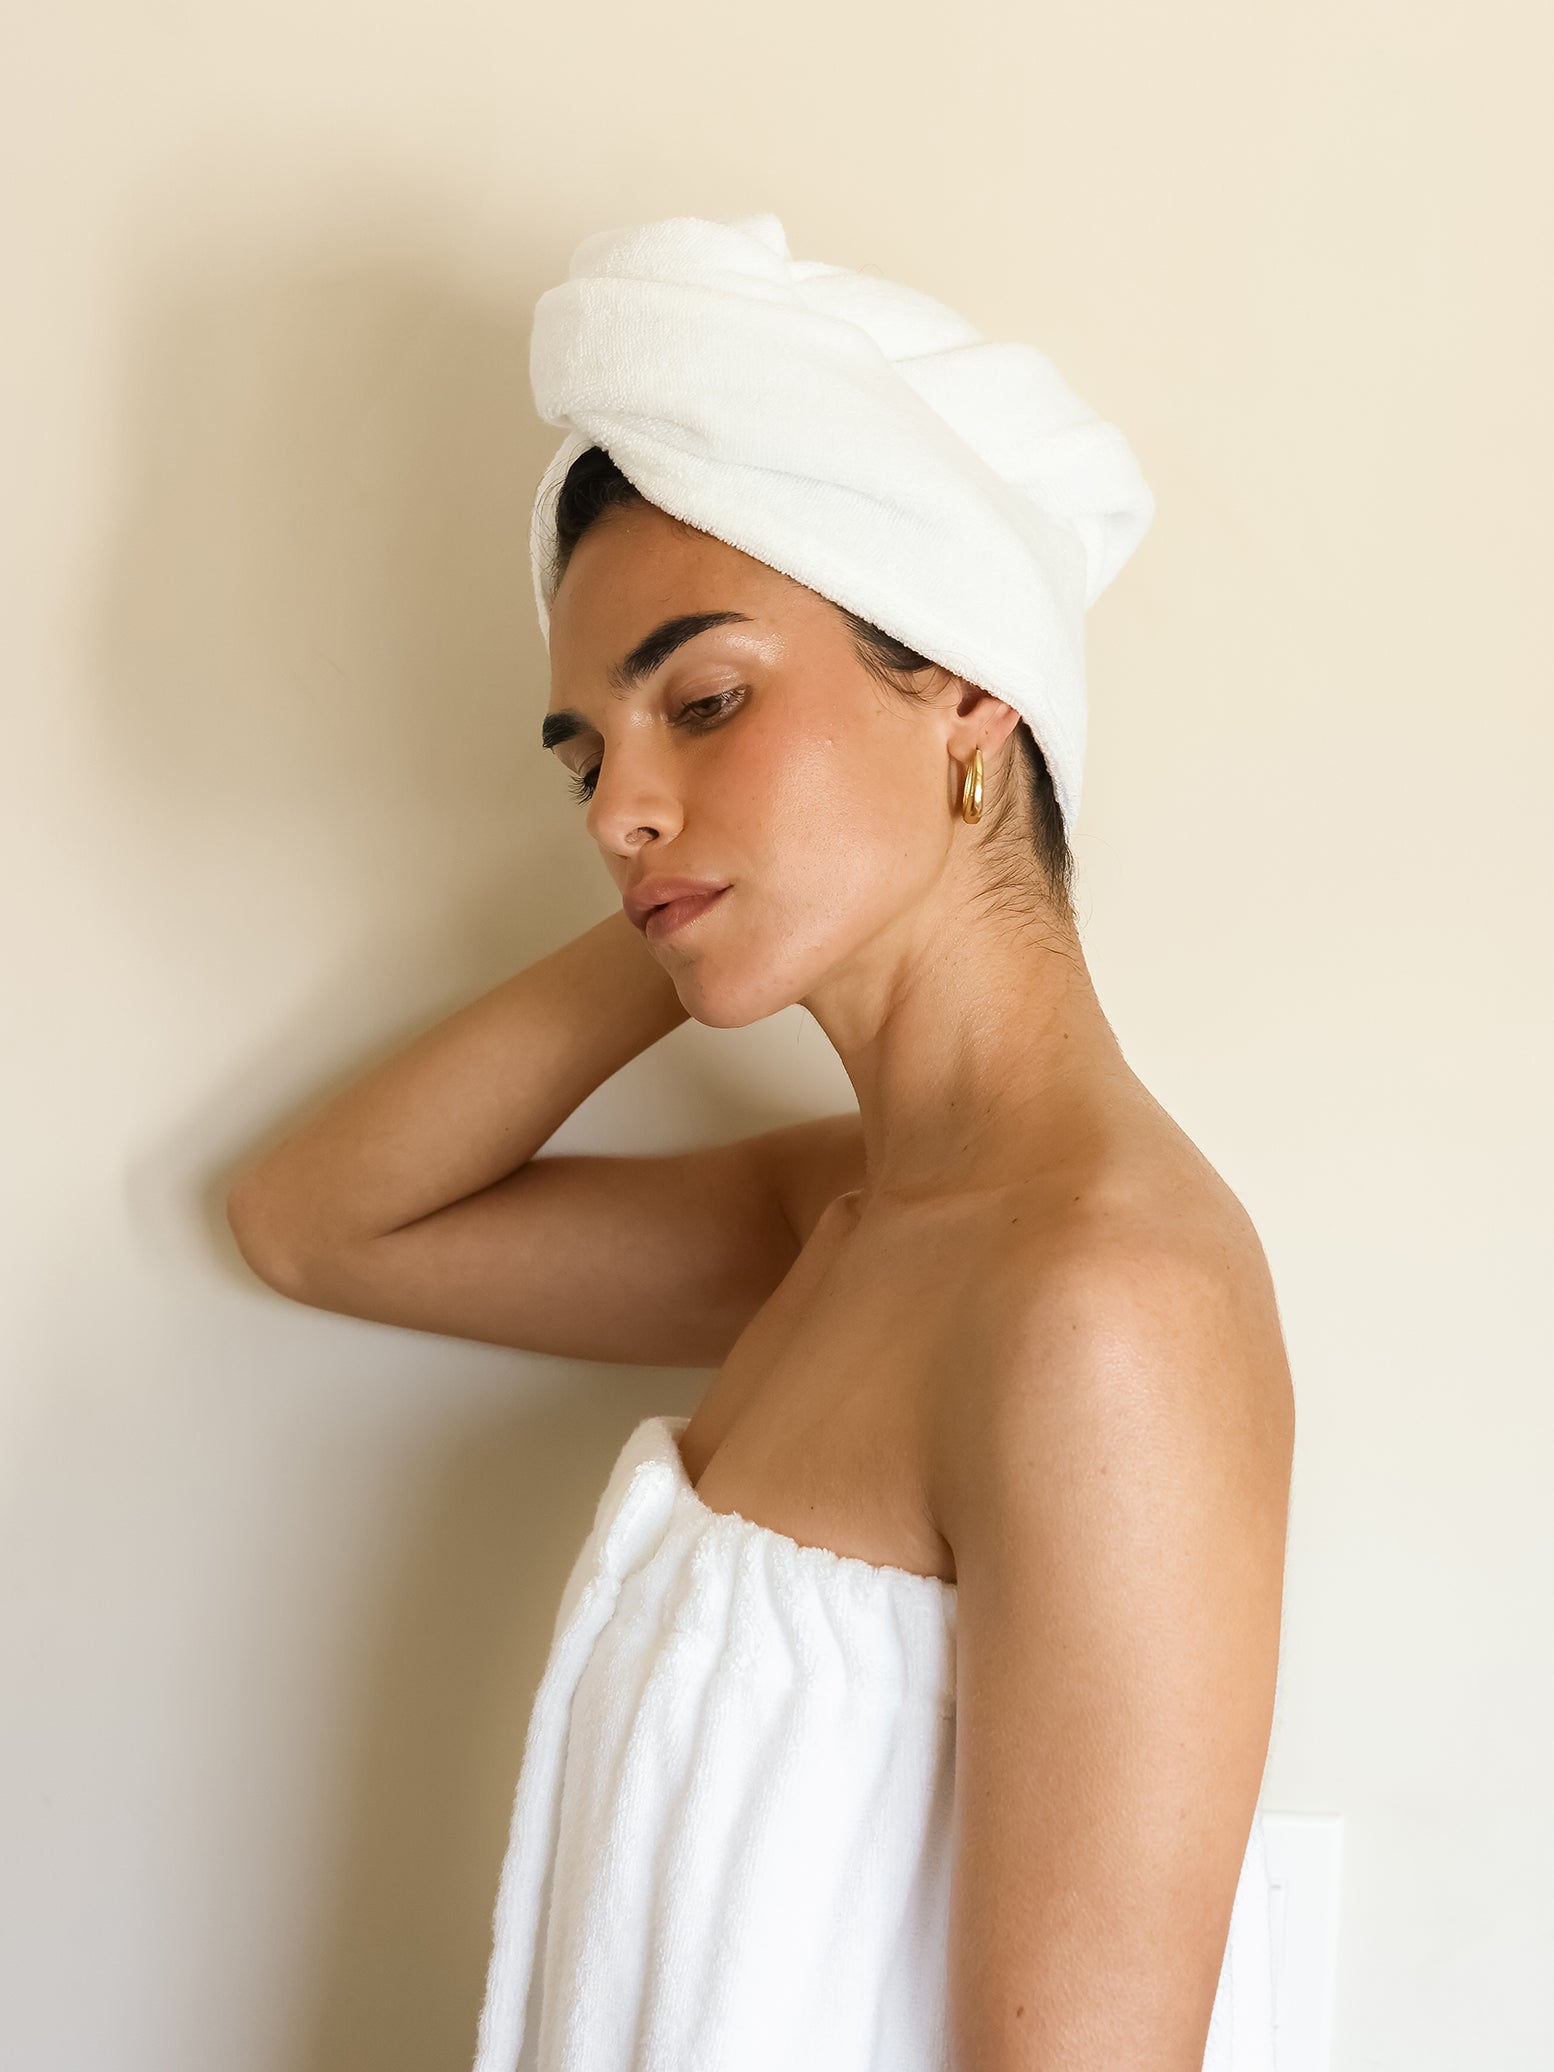 Woman with white hair towel with off-white background 